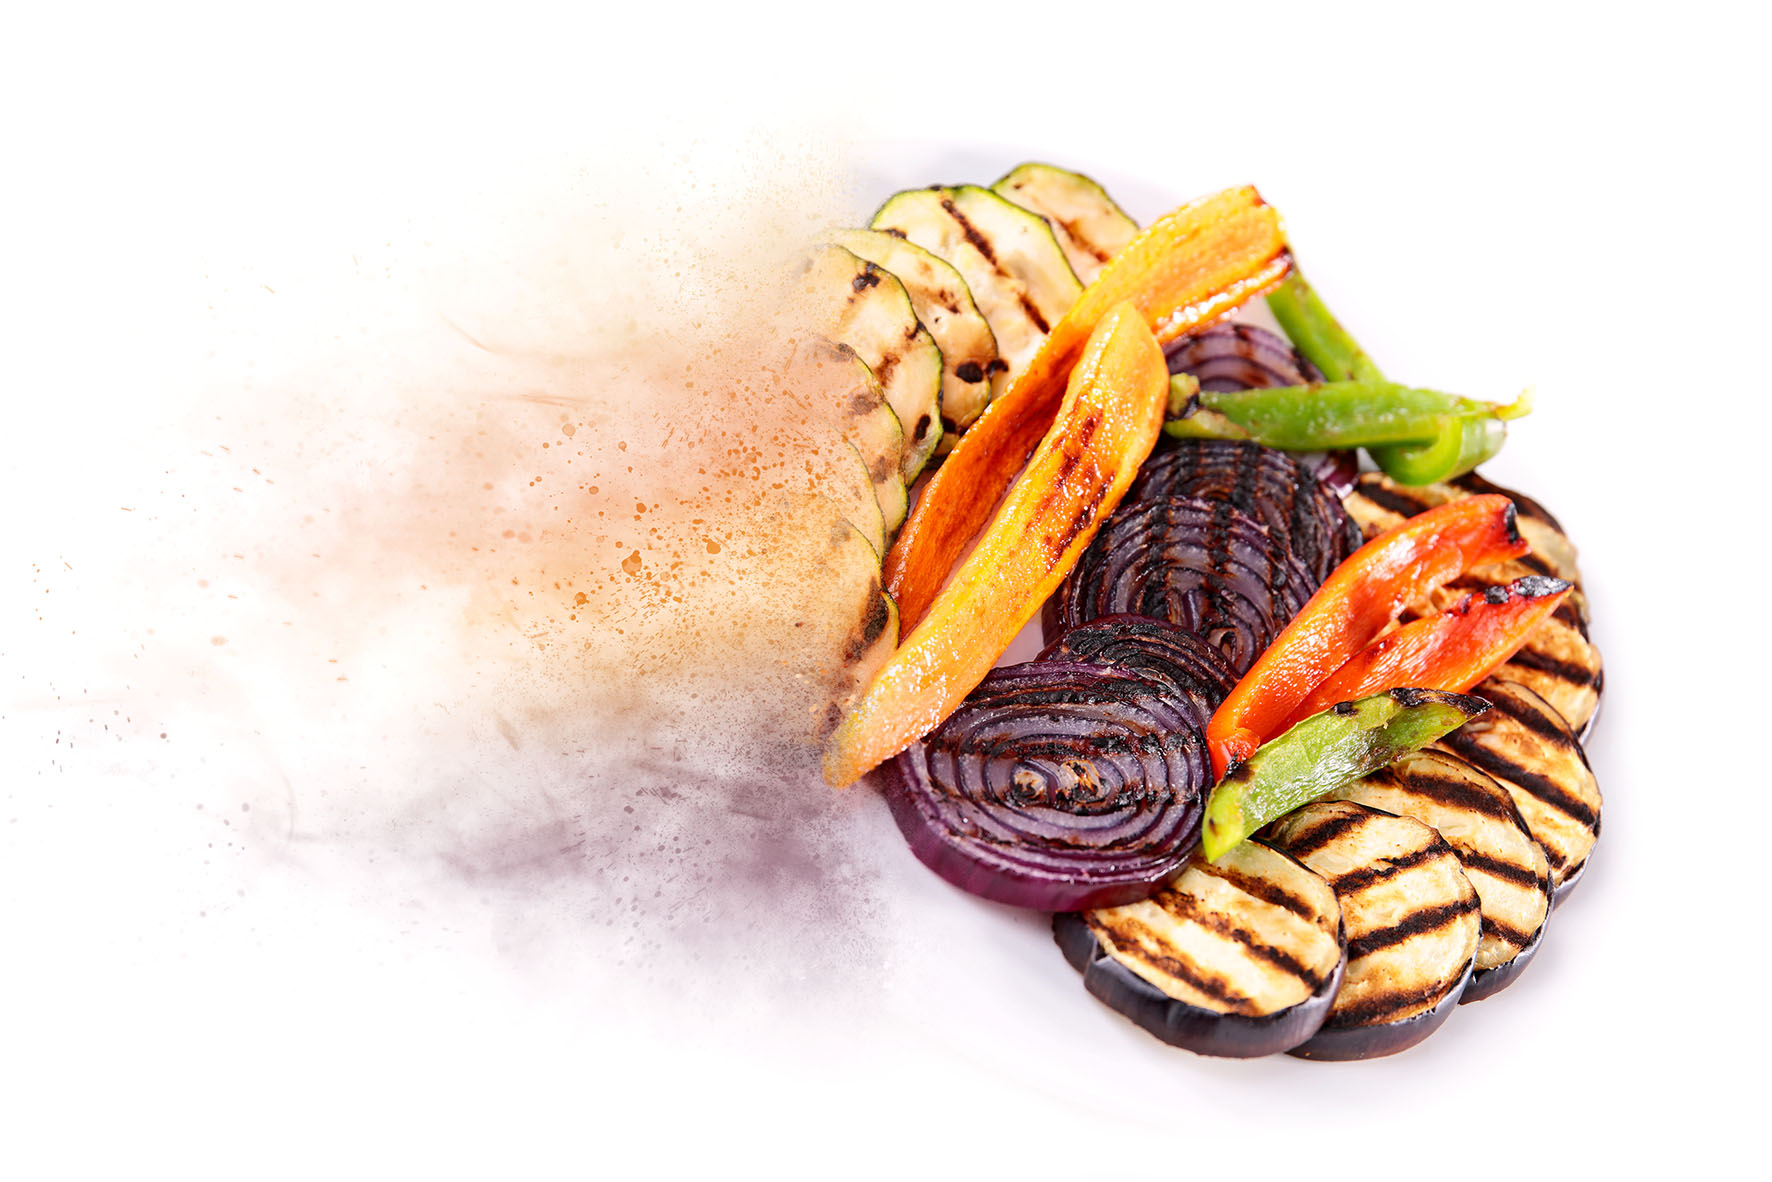 GRILLED VEGETABLES - CAPERS, EGGPLANT, ZUCCHINI, CARROT, ONION